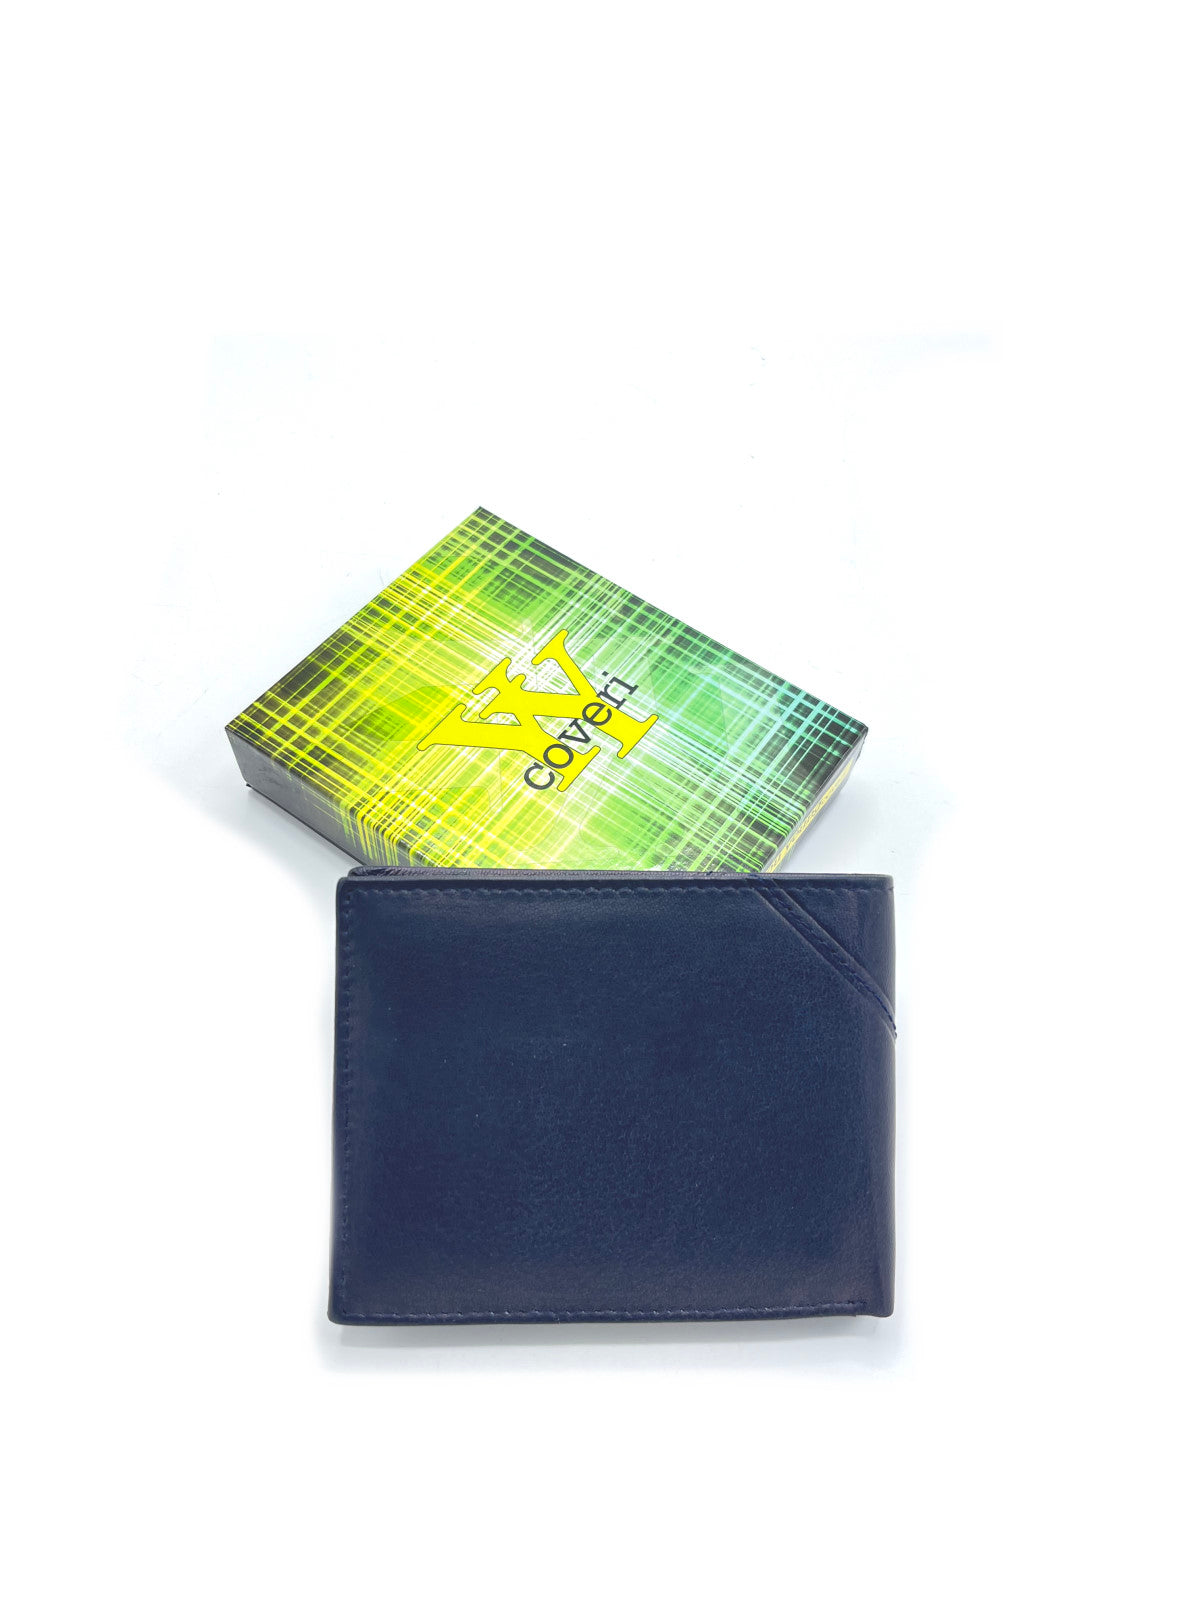 Genuine leather wallet for men, Brand You Young Coveri, art. GINE1161.422